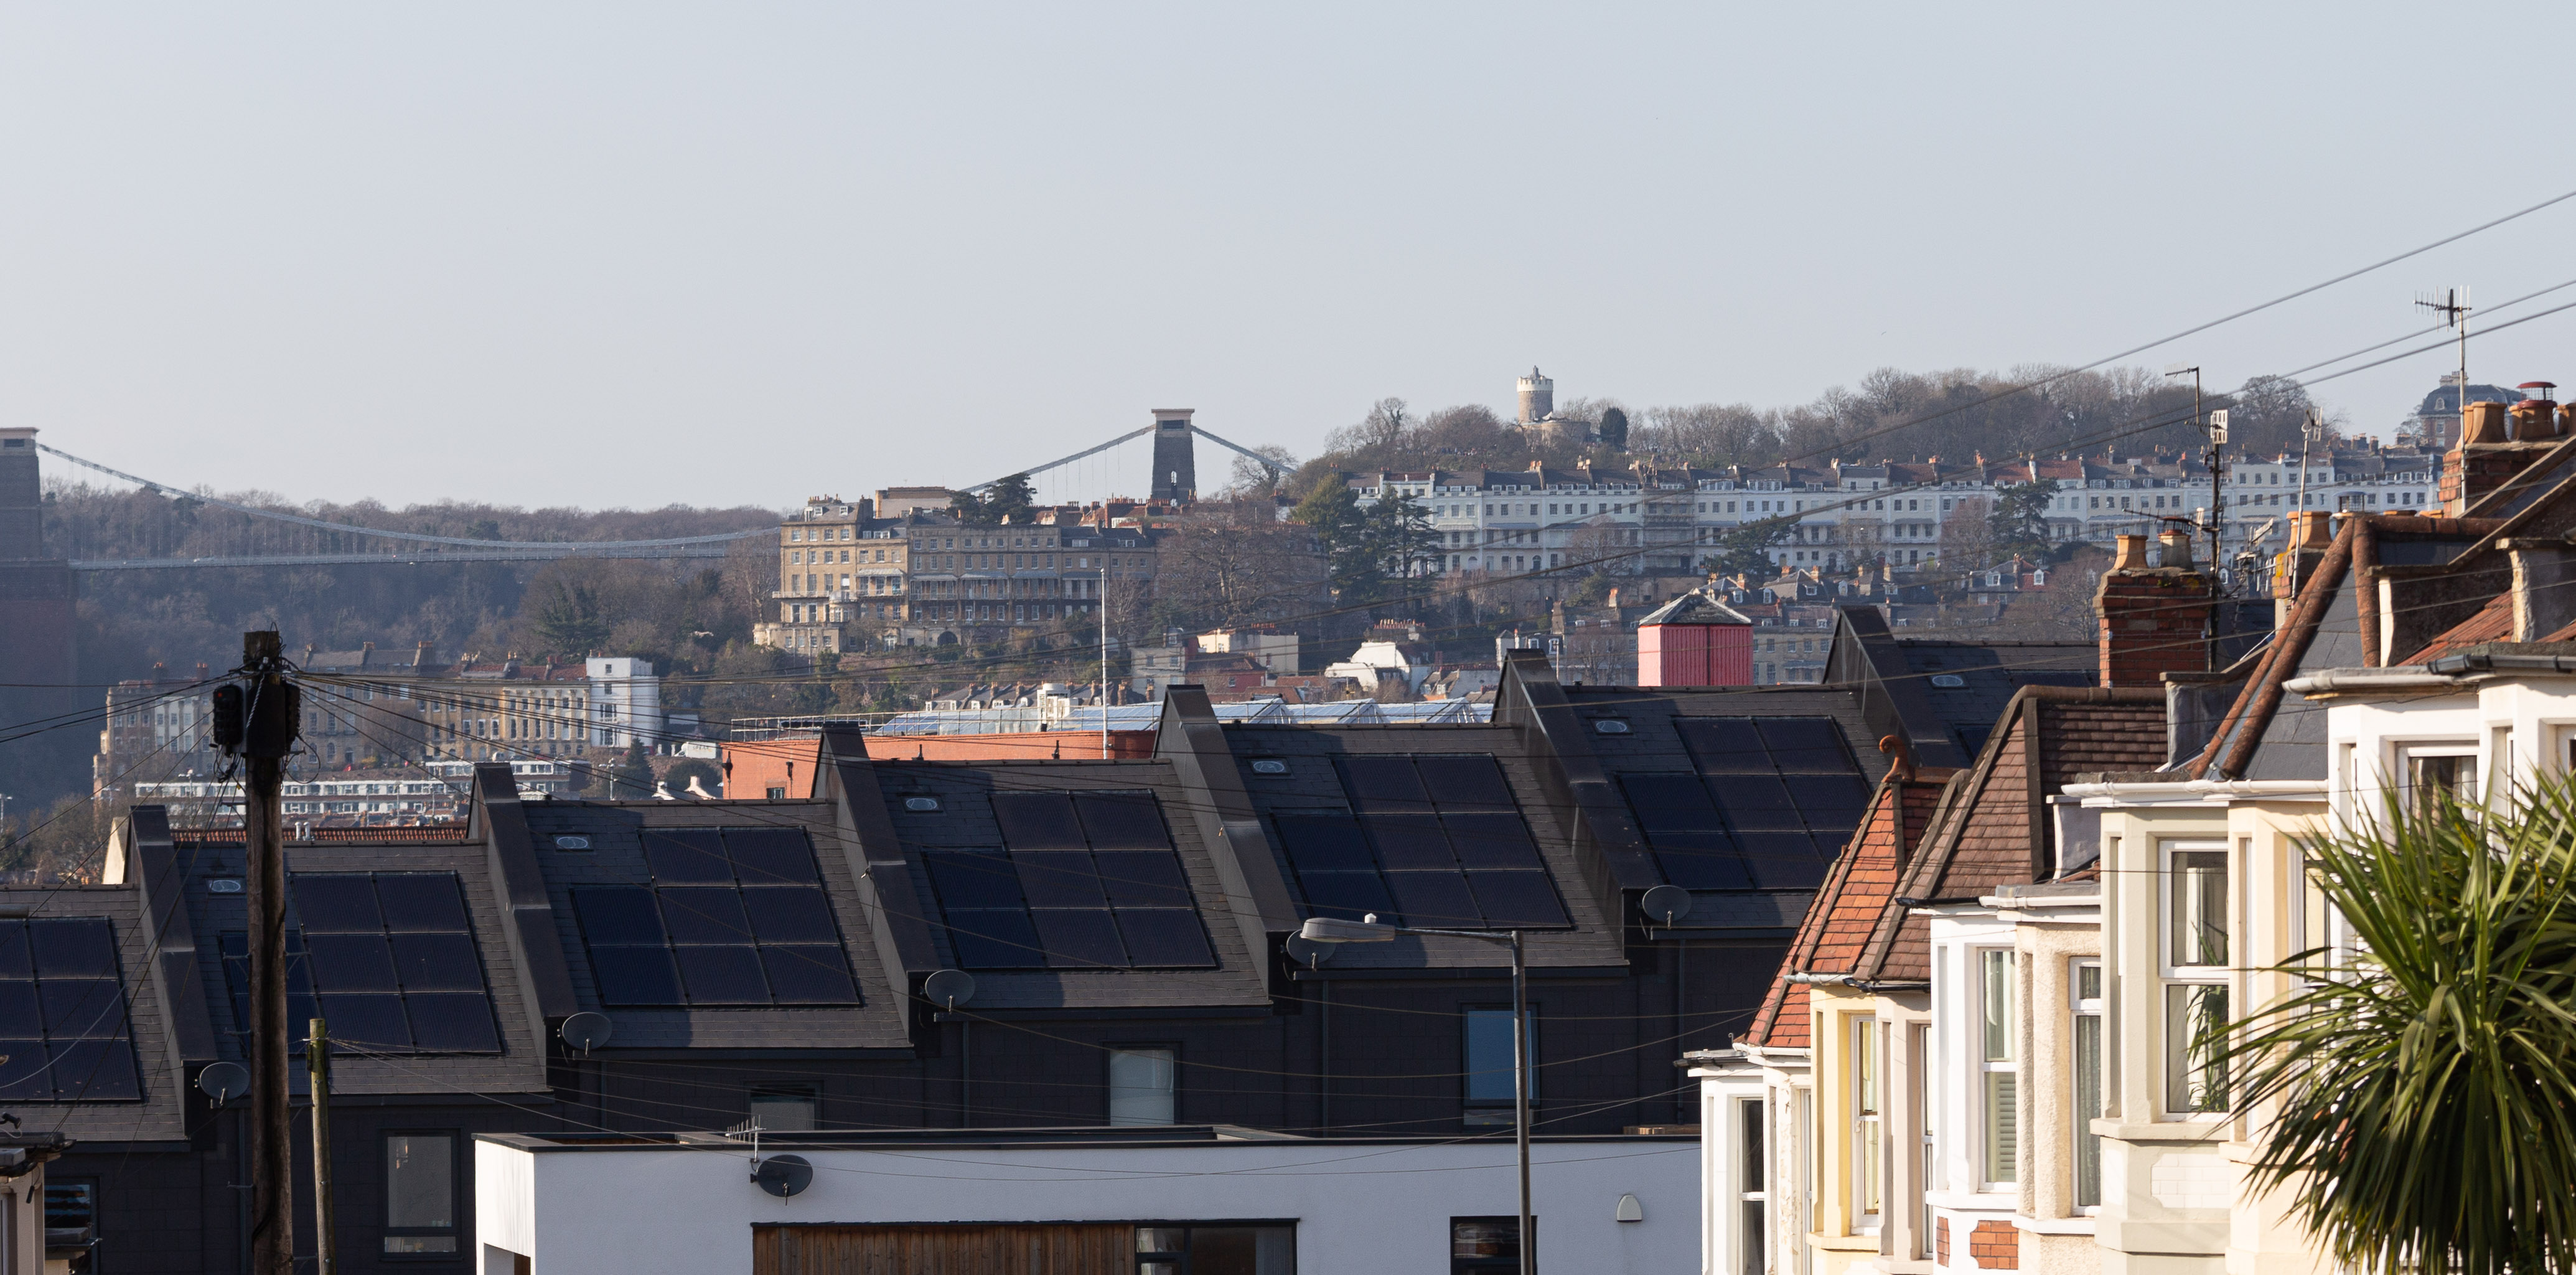 Solar Panels
A sign of the times: all the new build homes of Balfour Road have solar panels on top. I bet they're grateful of that, given the current energy pri...